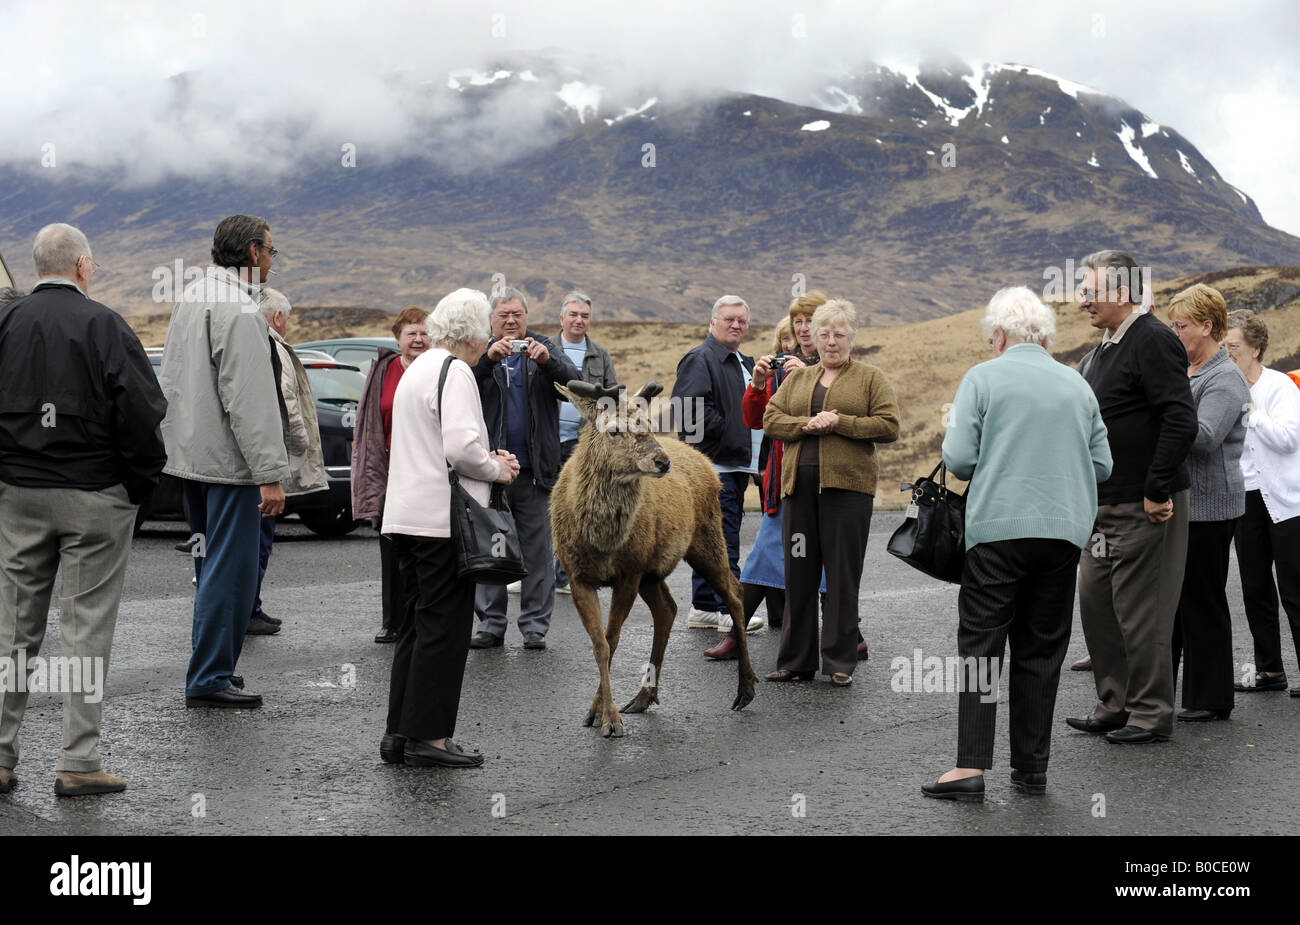 A WILD DEER MINGLES WITH TOURISTS AT A LAYBY IN THE HIGHLANDS OF SCOTLAND NEAR GLENCOE.UK Stock Photo